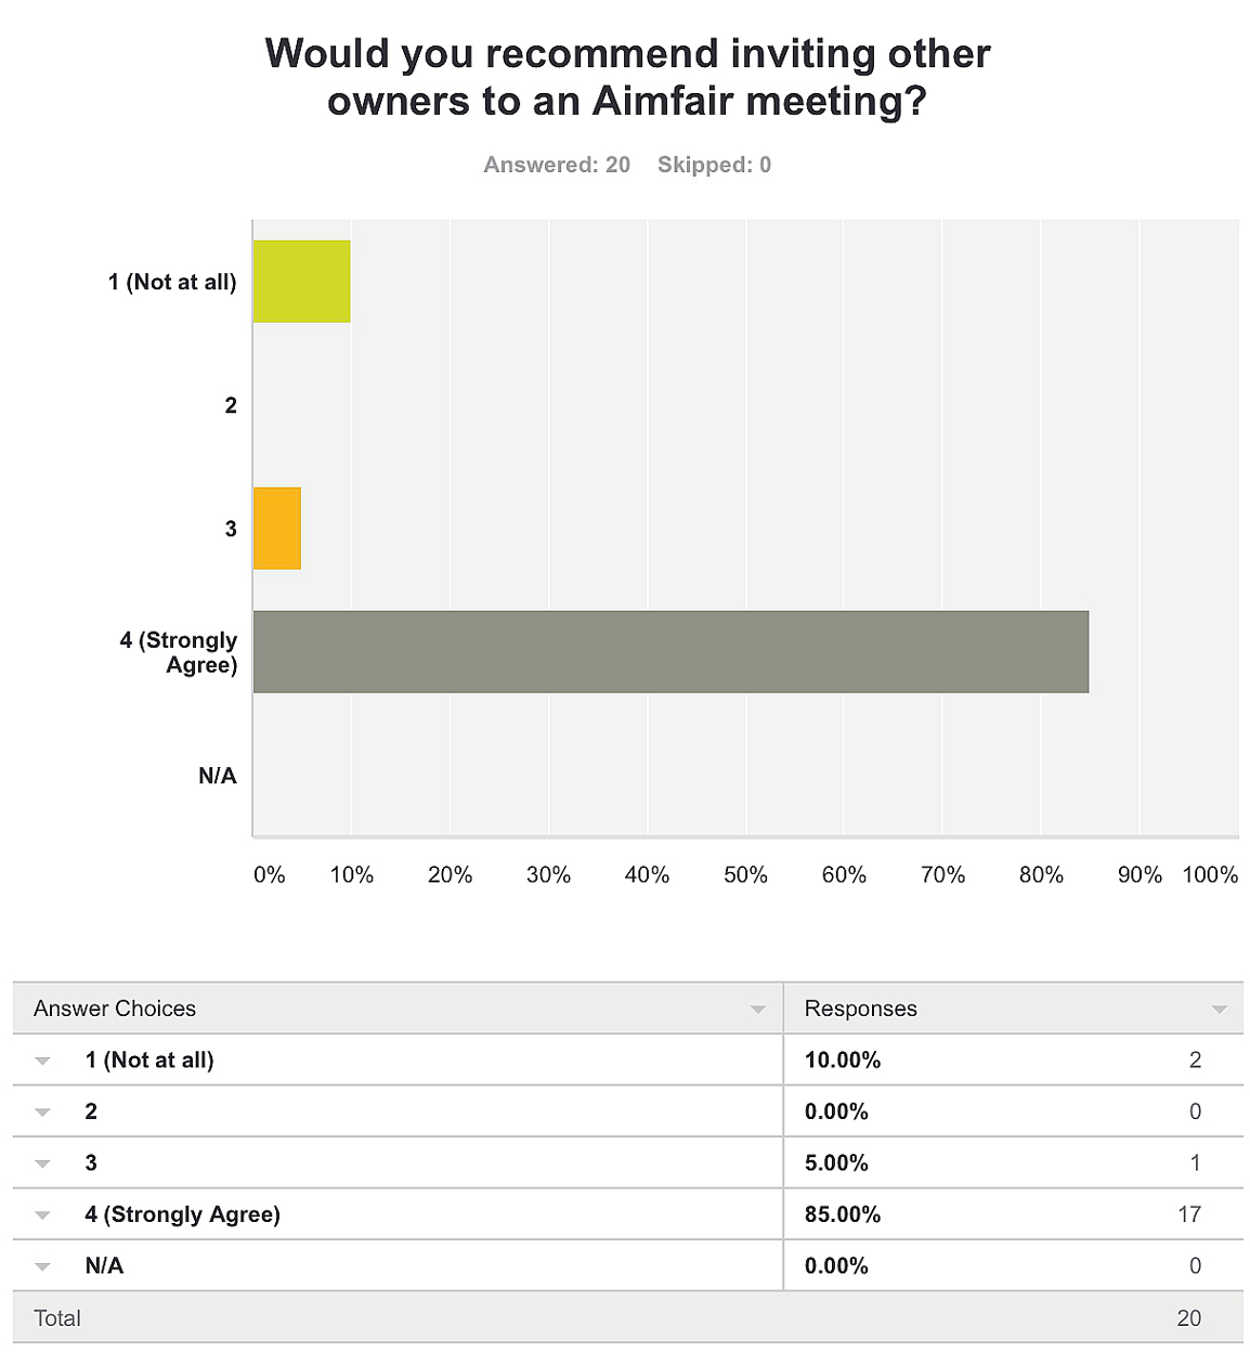 Notes and survey results for the 3-22-17 Aimfair Gathering are available.  Members can view the results here. Stay tuned....Subscriber View - 3/22/17